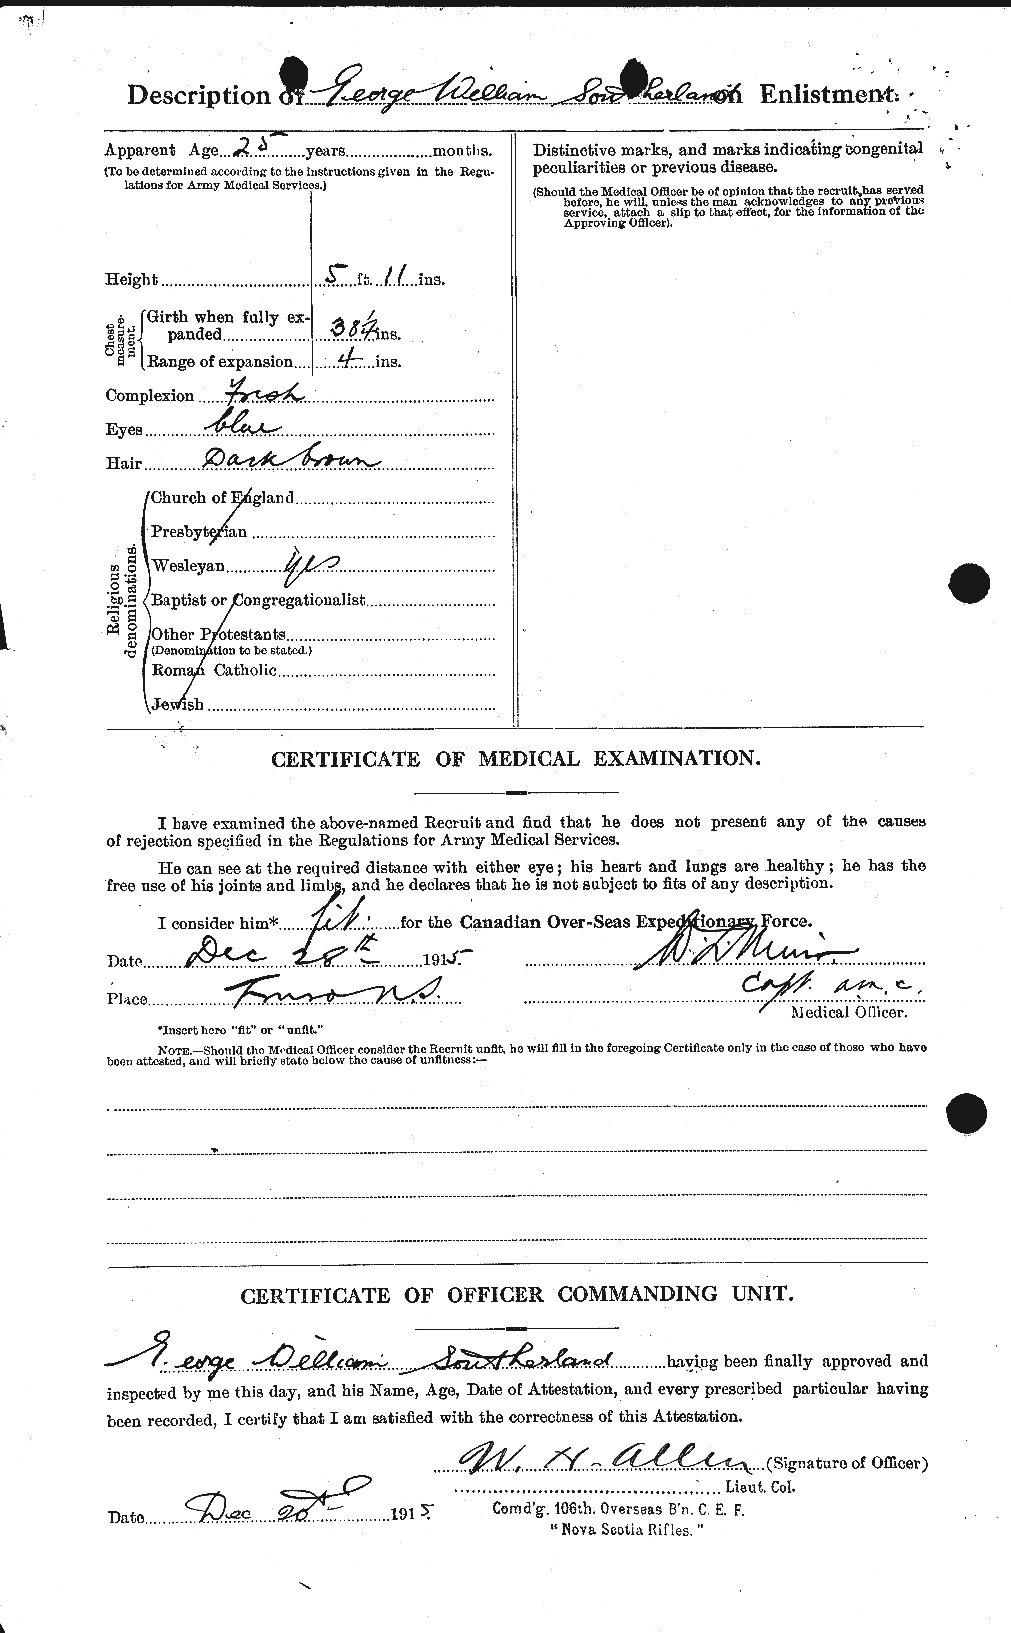 Personnel Records of the First World War - CEF 124842b